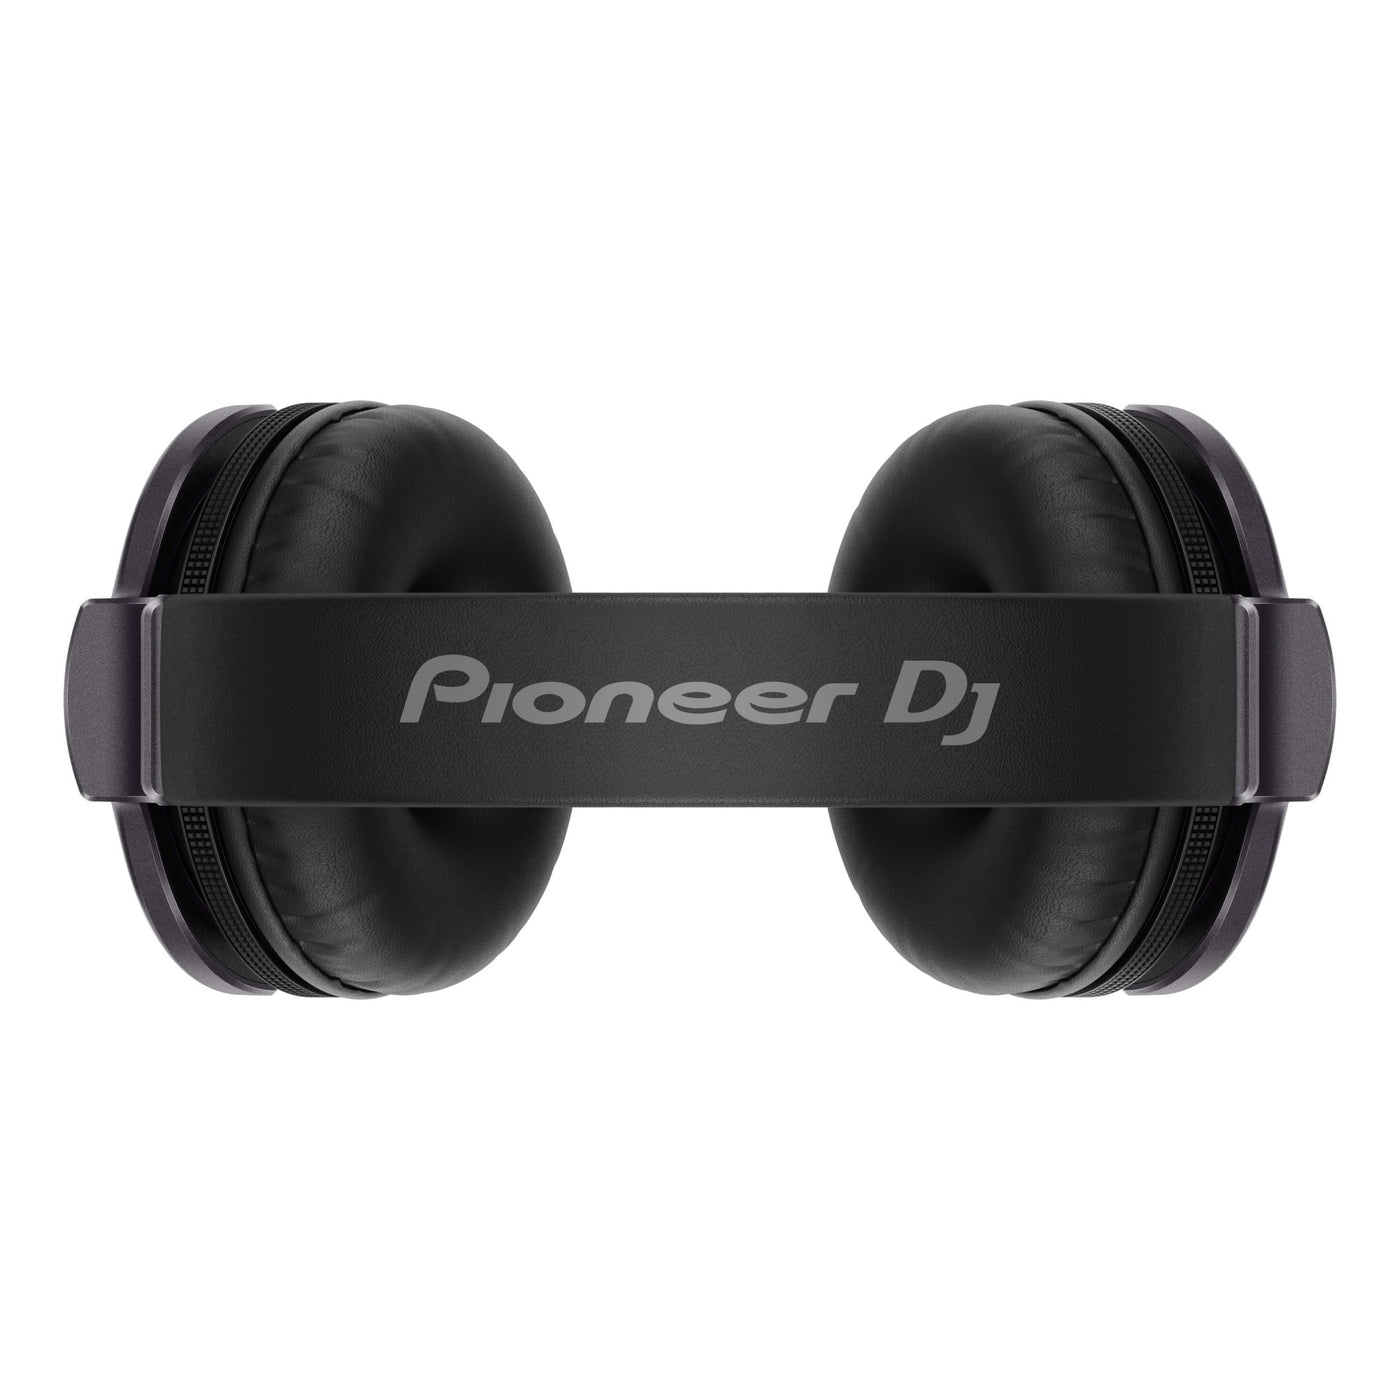 Pioneer DJ HDJ-CUE1 On-Ear Wired Studio Headphones, Professional Audio Equipment for Recording and DJ Booth, Dark Silver